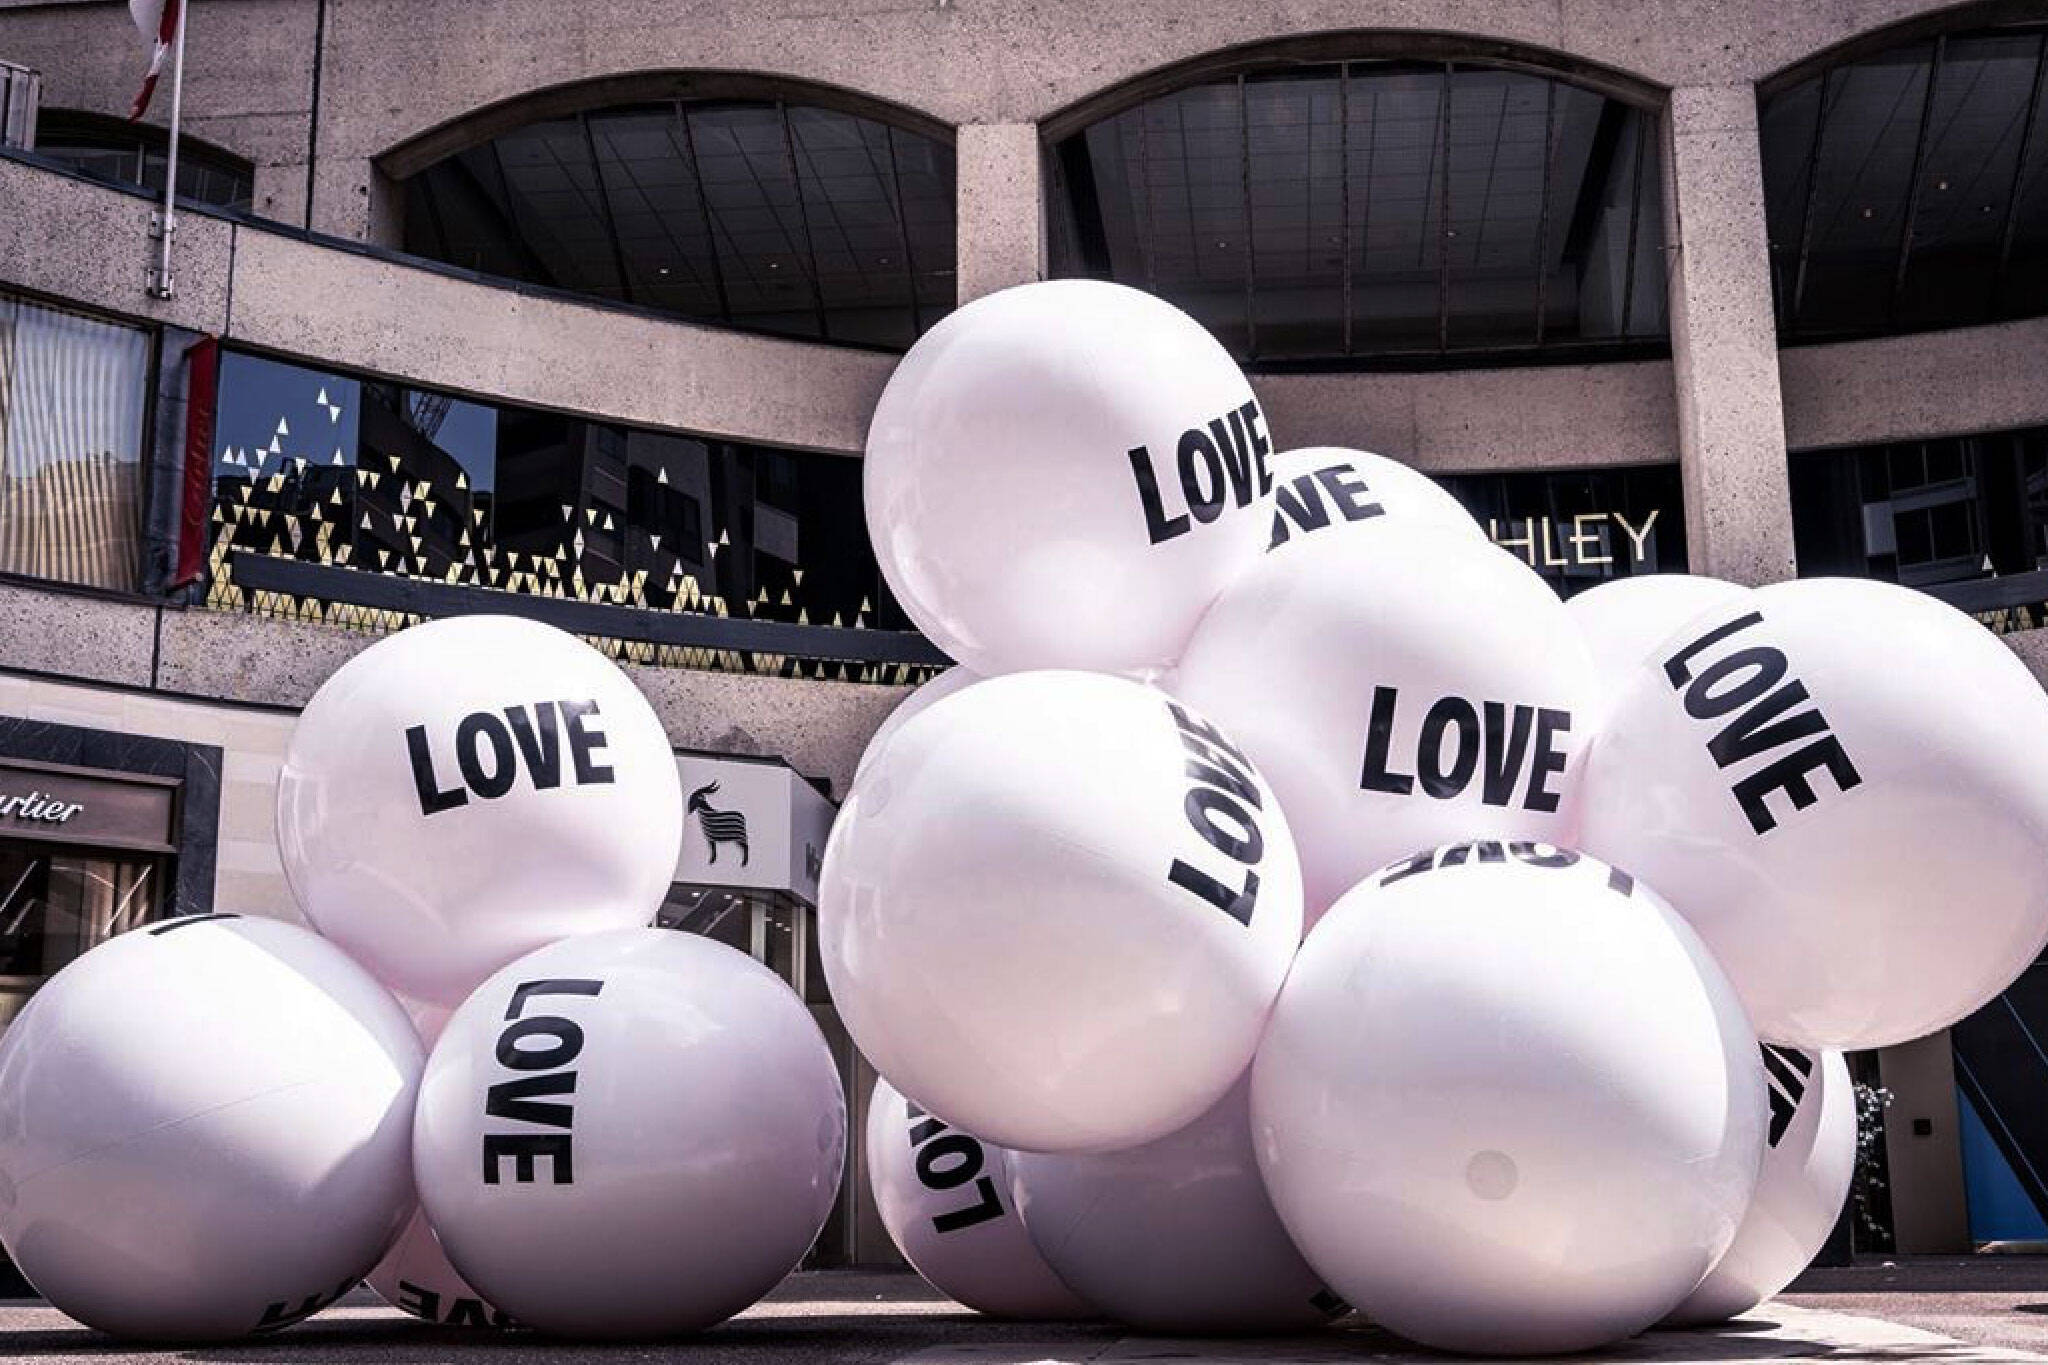 Giant Balls Of Love Have Just Appeared On A Toronto Street